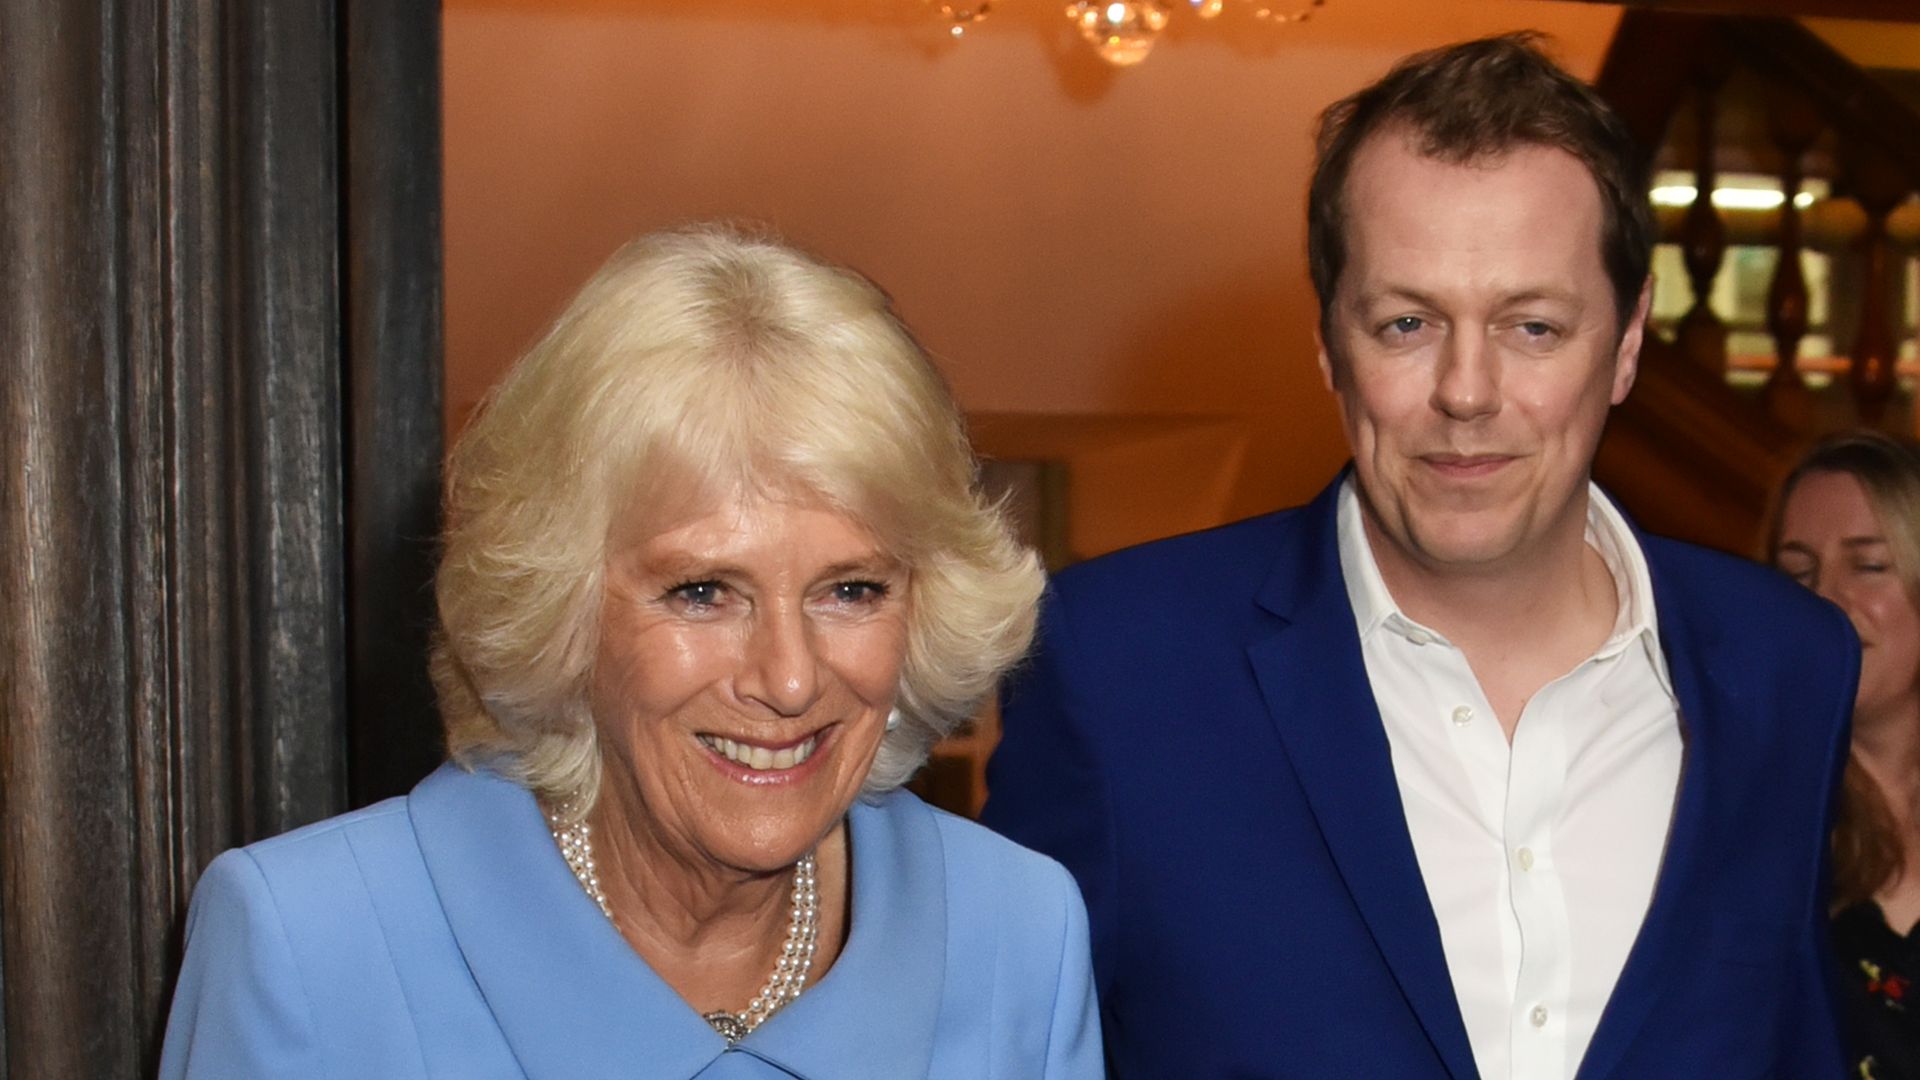 Tom Parker Bowles comments on Queen Consort's marriage to King Charles